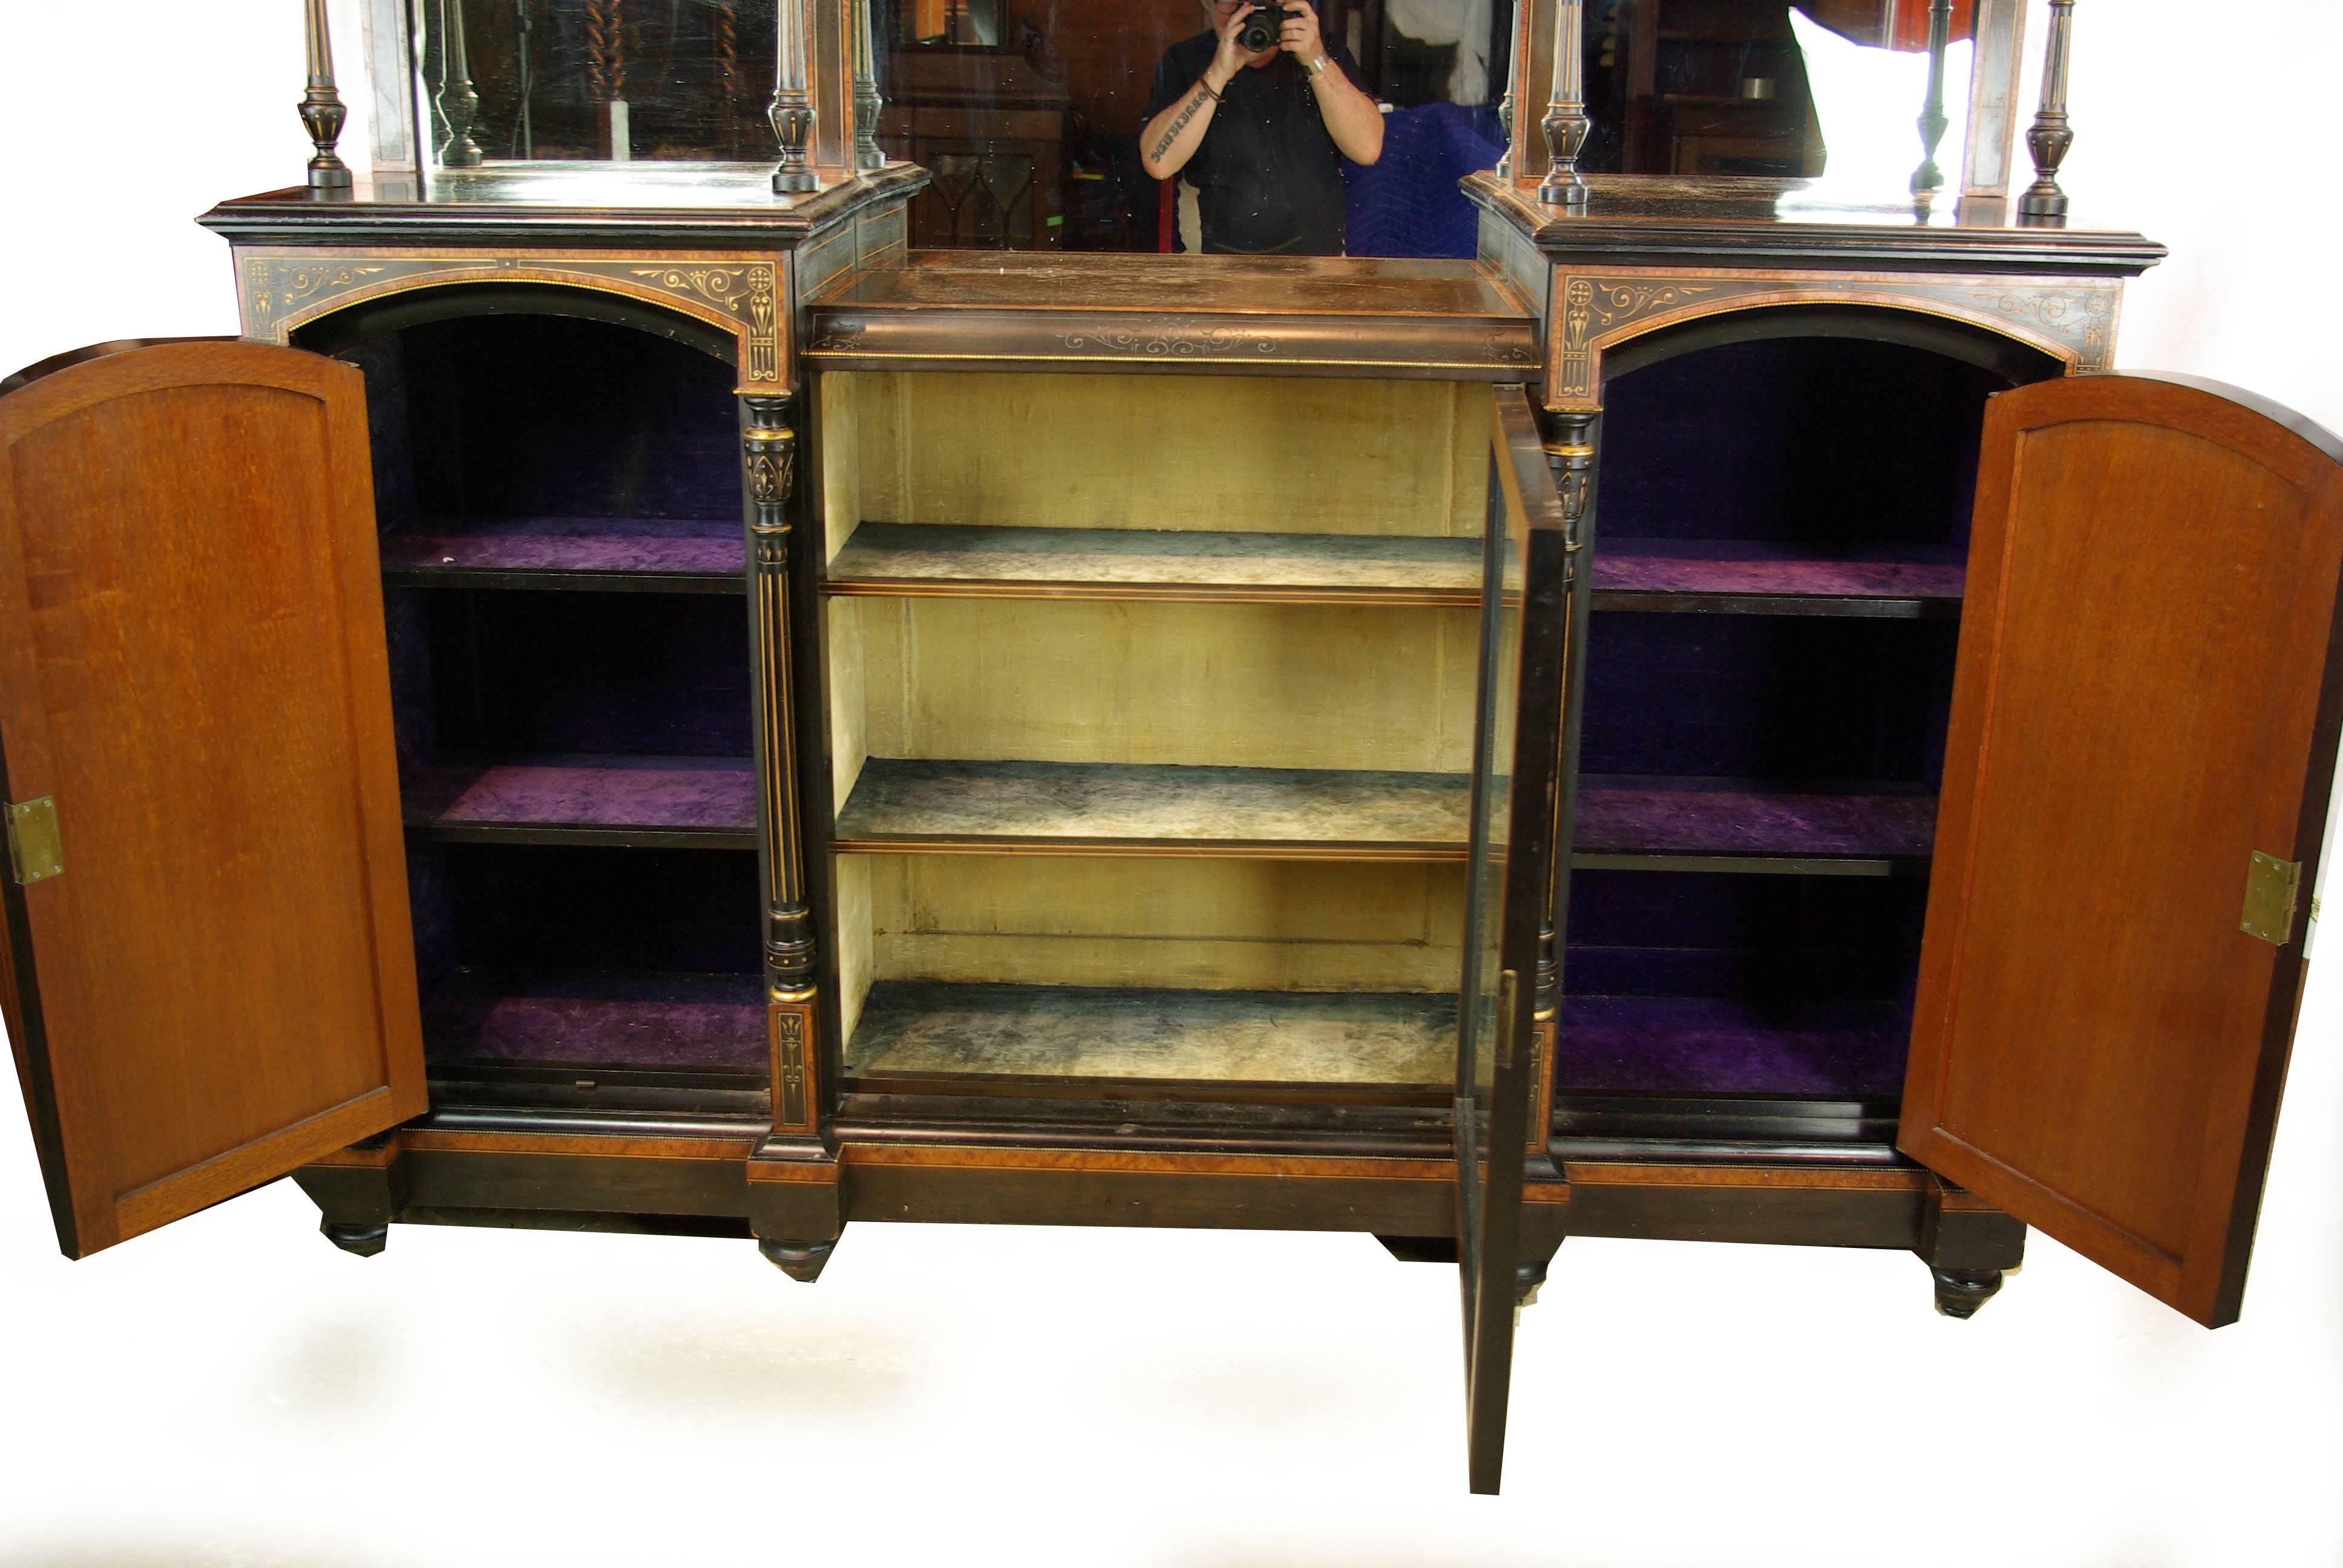 Antique ebonized sideboard, Victorian sideboard, Aesthetic Movement, Scotland 1880, antique furniture, B1134 

Scotland 1880
The top with central large mirror flanked by a pair of smaller mirrors with shelves
supported on delicate turned